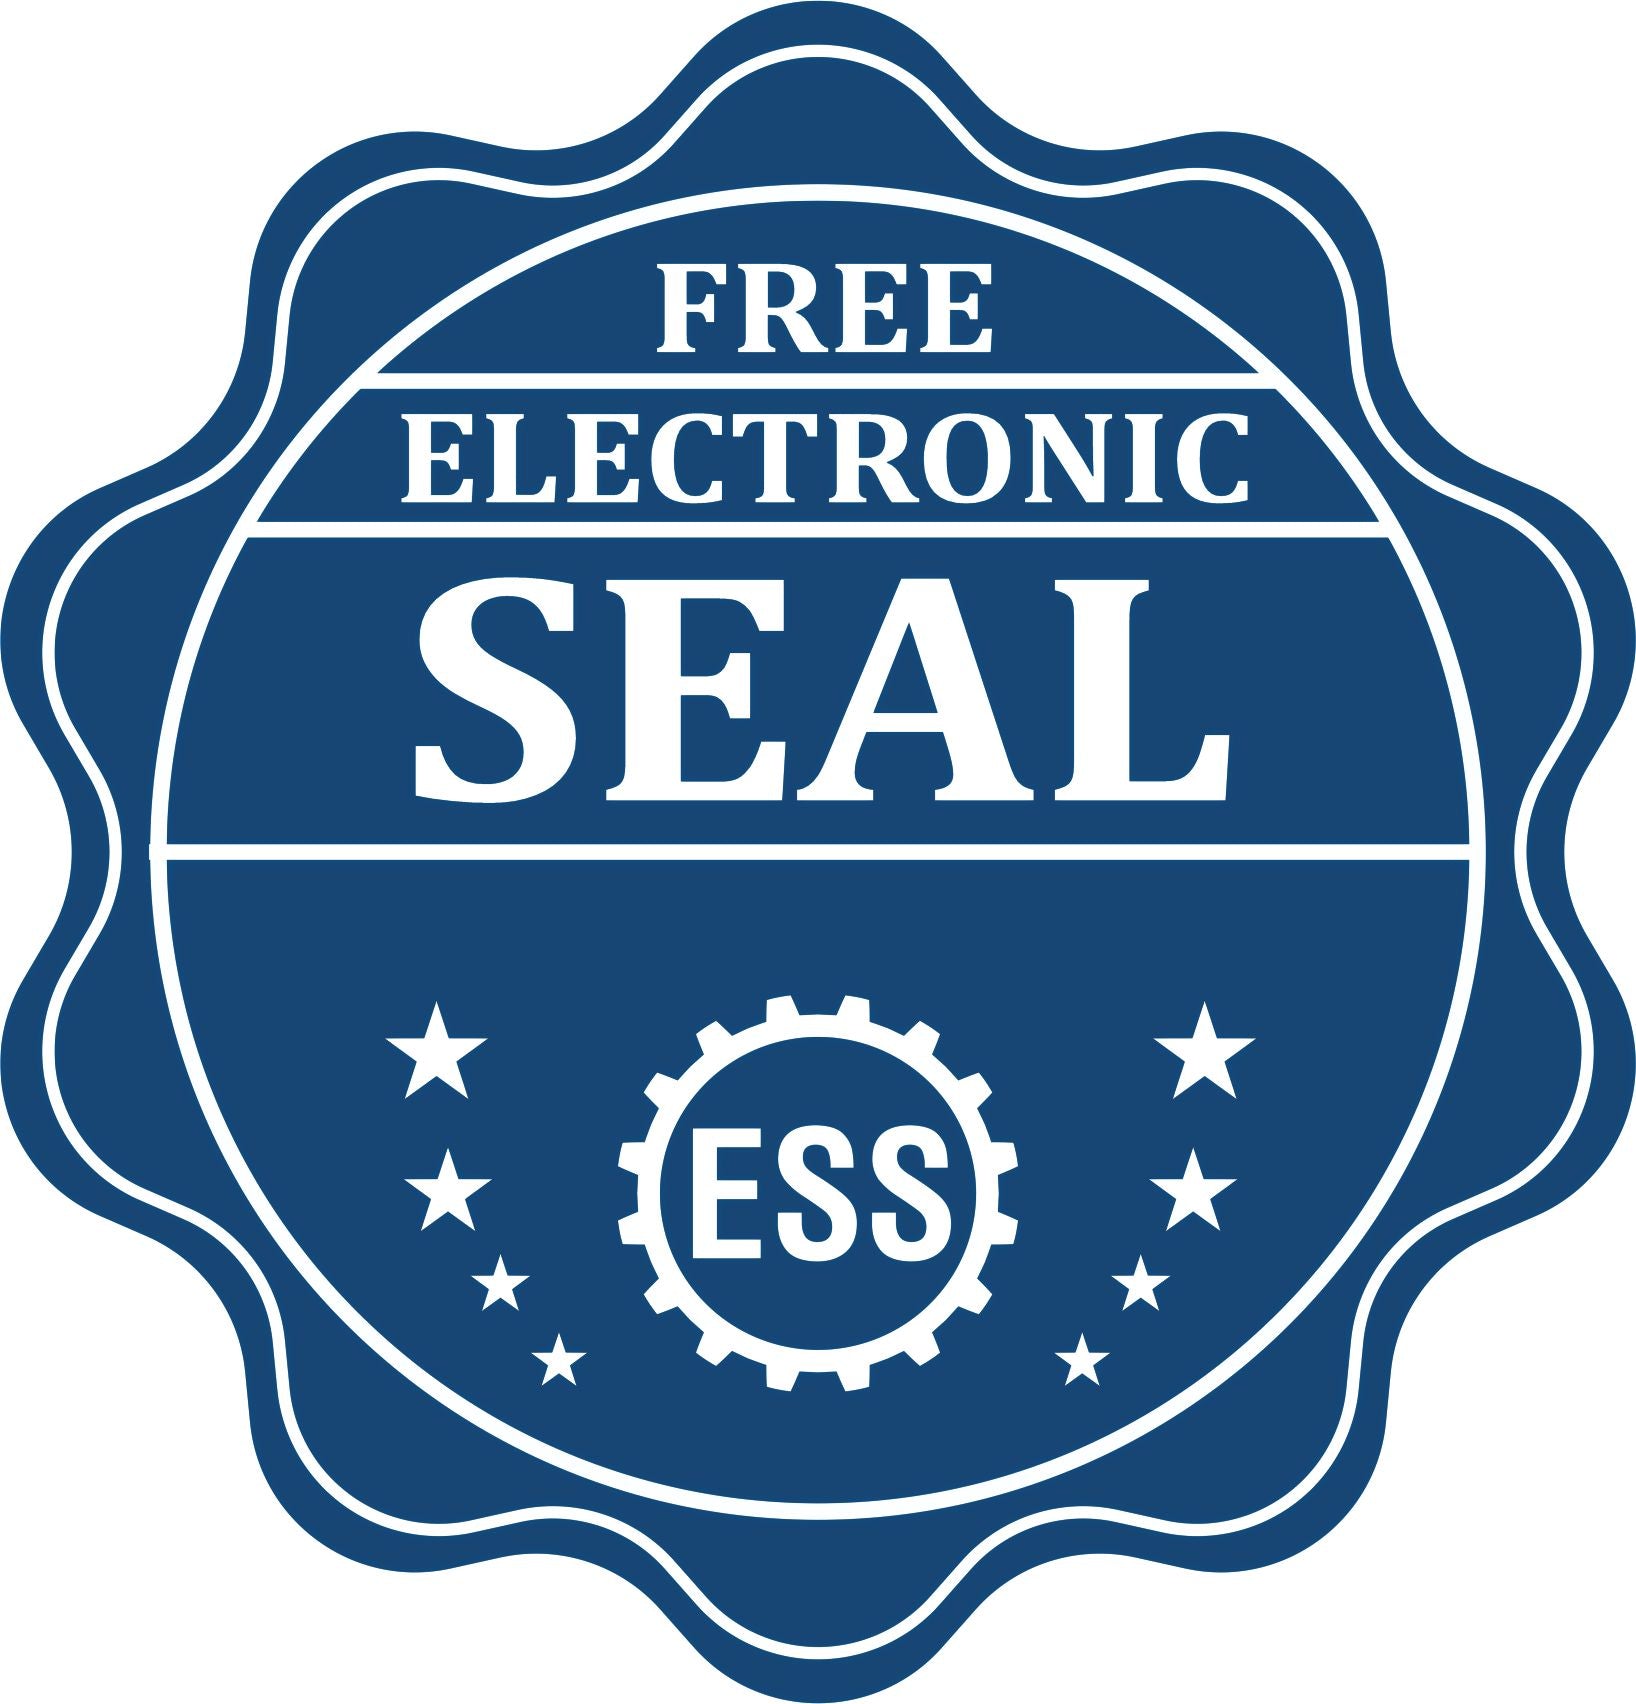 A badge showing a free electronic seal for the Gift New Jersey Landscape Architect Seal with stars and the ESS gear on the emblem.